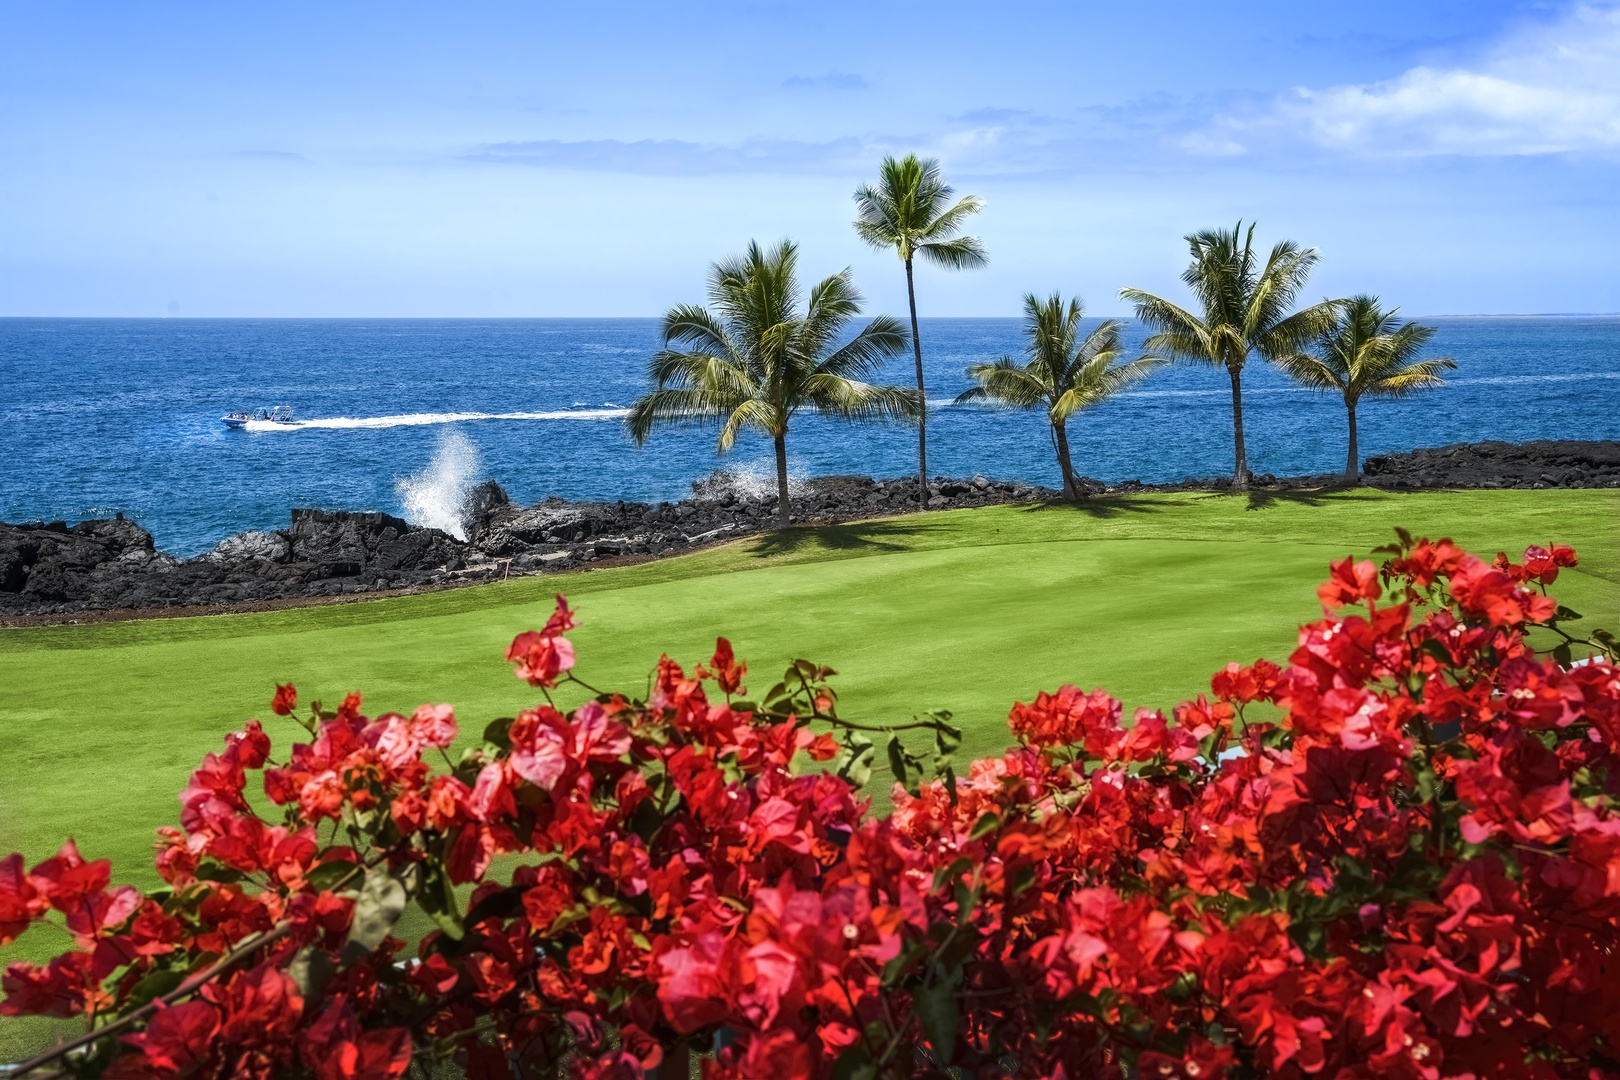 Kailua Kona Vacation Rentals, Blue Orca - Zoomed view of the spectacular coastline and golf course!